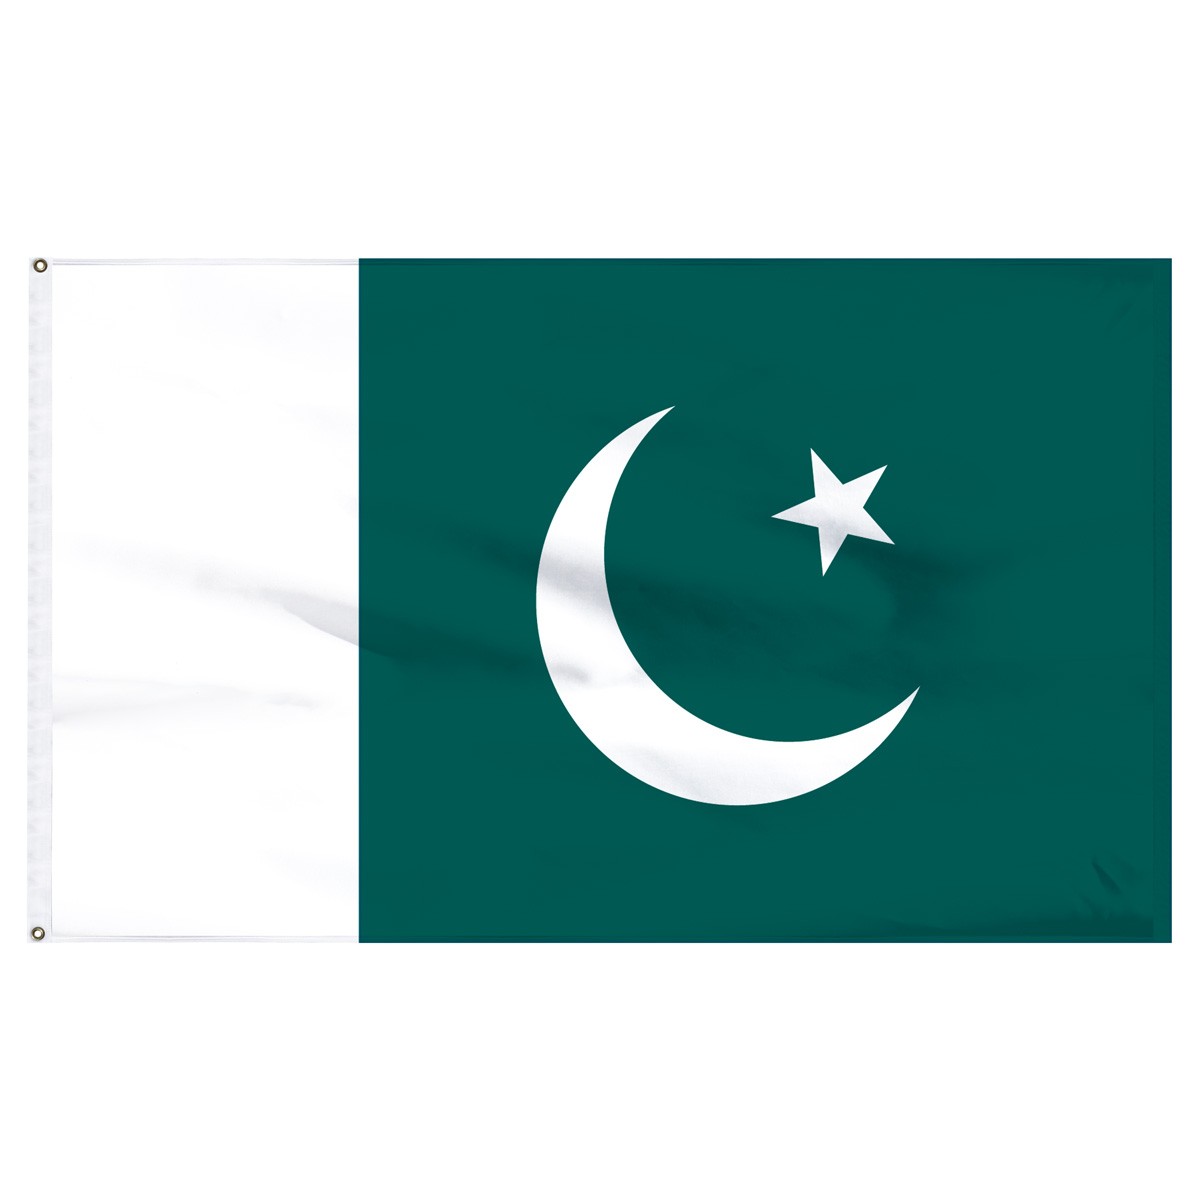 Pakistan Building Pennants and Flags